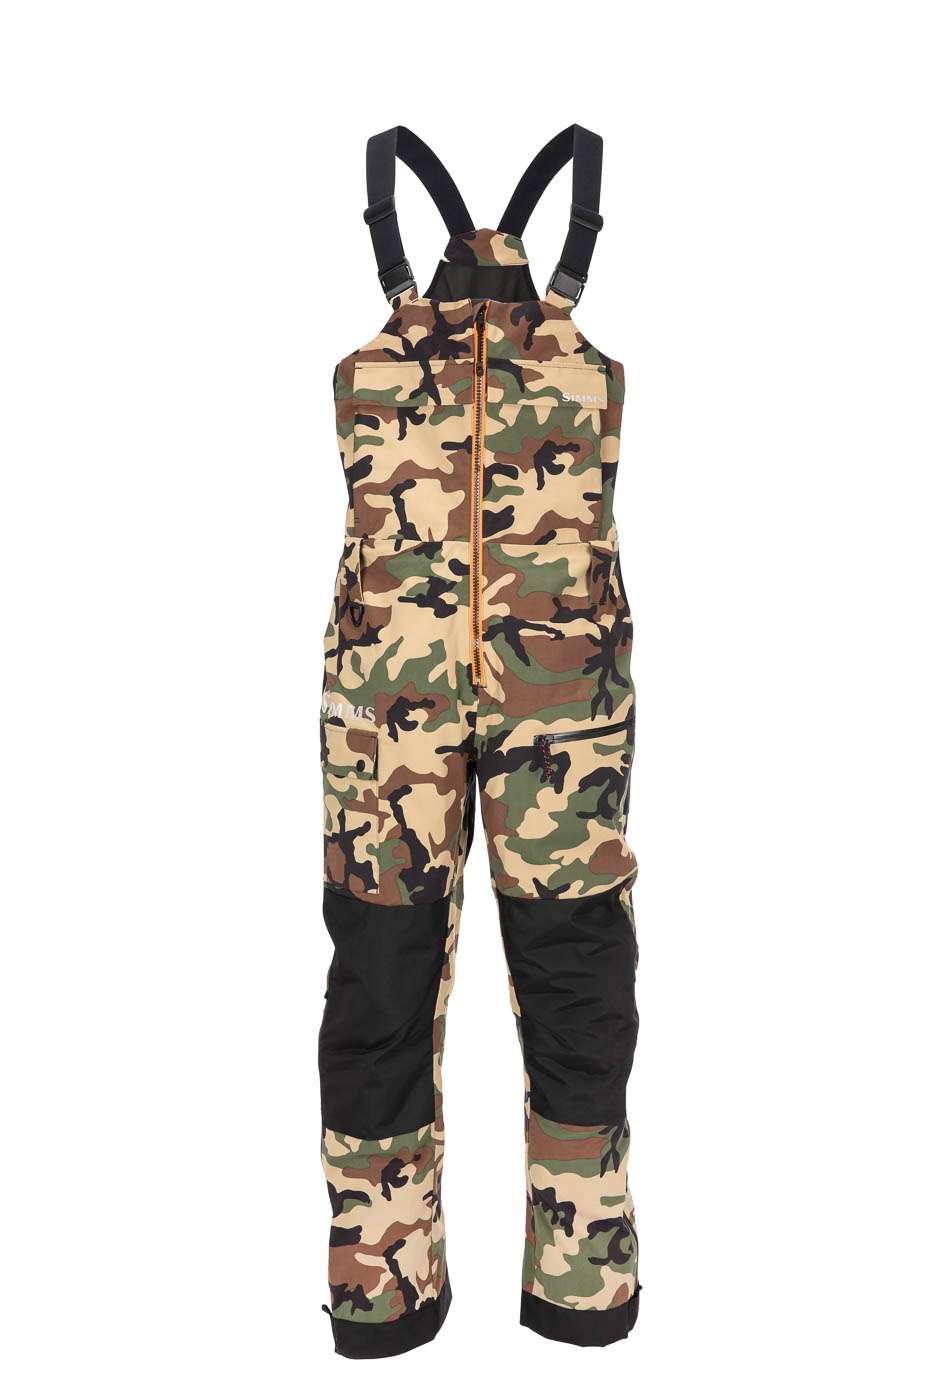 <p><strong>Simms CX Fishing Bib</strong></p><p>The perfect companion to the CX Fishing Jacket, this pro-level, extreme gear bib has adjustable suspenders and a stretch back panel for all-day comfort. Belt loops give the wearer the option of securing a tool belt and kill switch using the D-Ring. The left thigh pocket is constructed with a TRU Zip waterproof waterproof zipper for 100% waterproof protection keeps the water out. Articulated leg seams provide ample range of motion, and the seat, knee and bottom hem panels are reinforced for durability. Zippered leg openings provide easy removal, and can be cinched down with an adjustable hook and loop hem. $399.99. <a href=